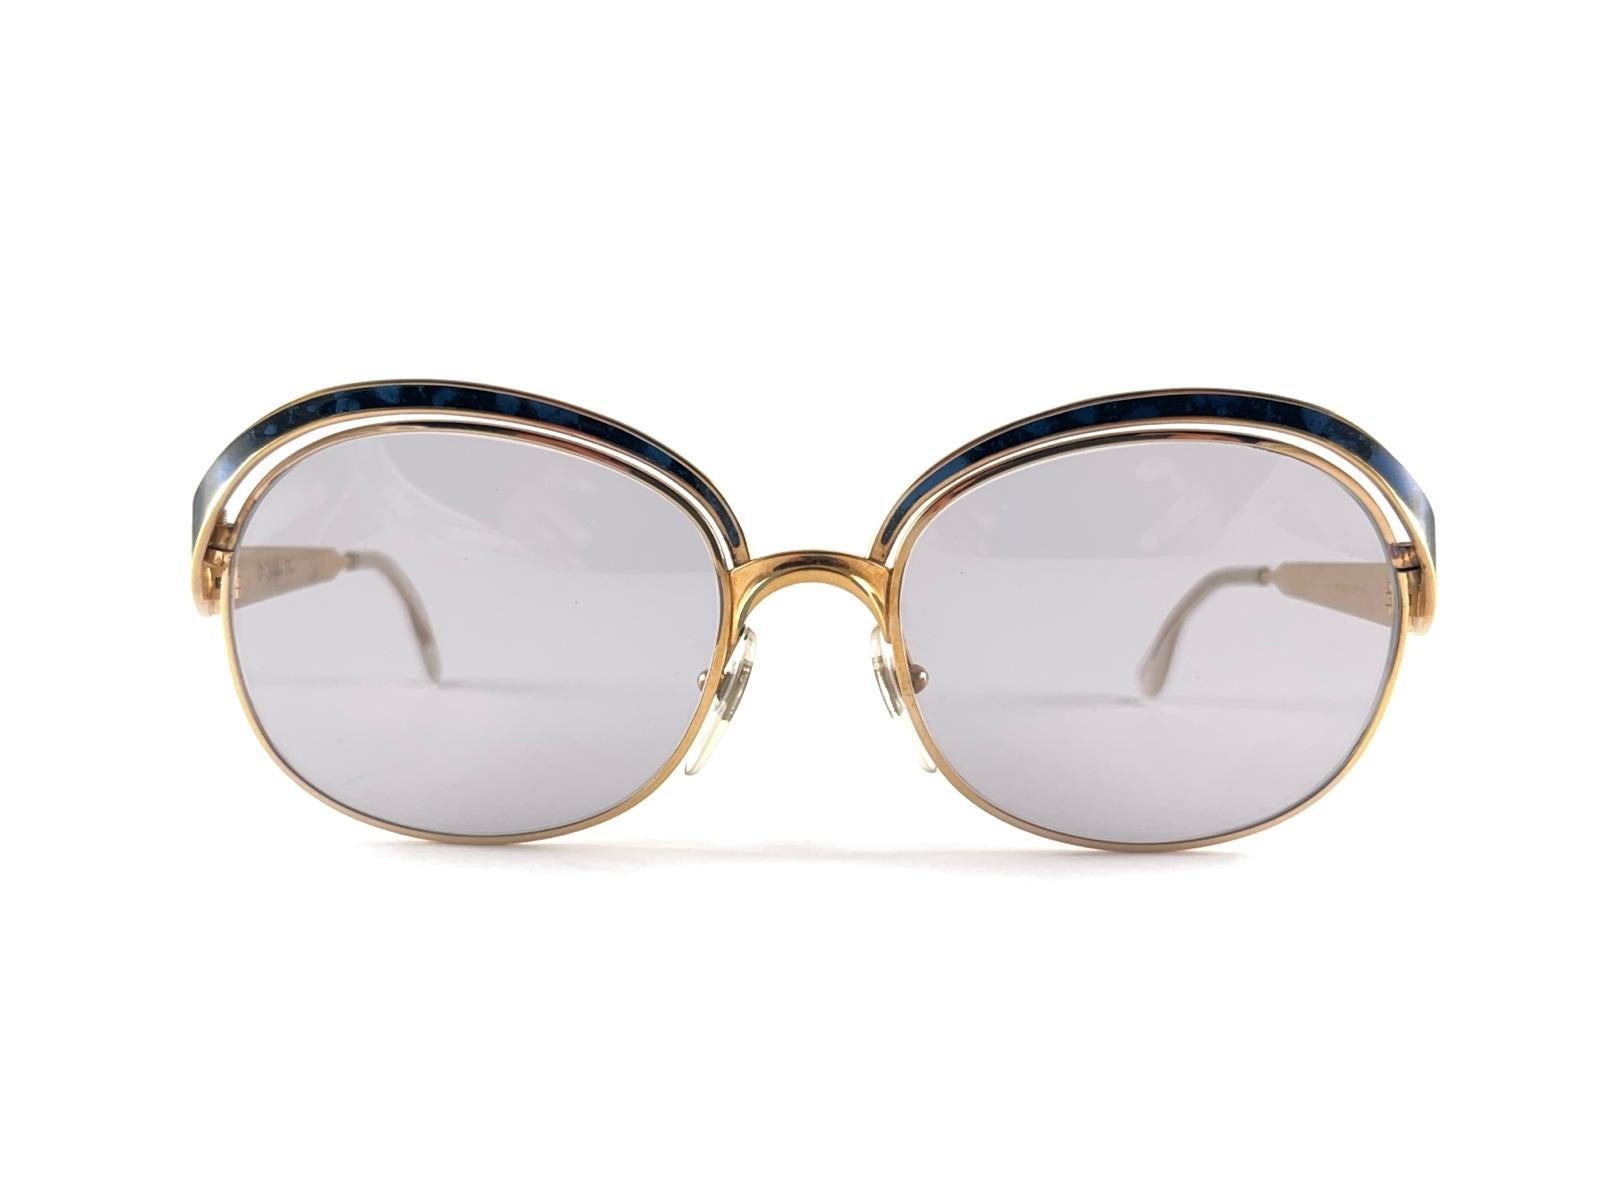 Vintage Christian Dior 2037  Gold & Blue Marbled Sunglasses 1970'S Austria In New Condition For Sale In Baleares, Baleares